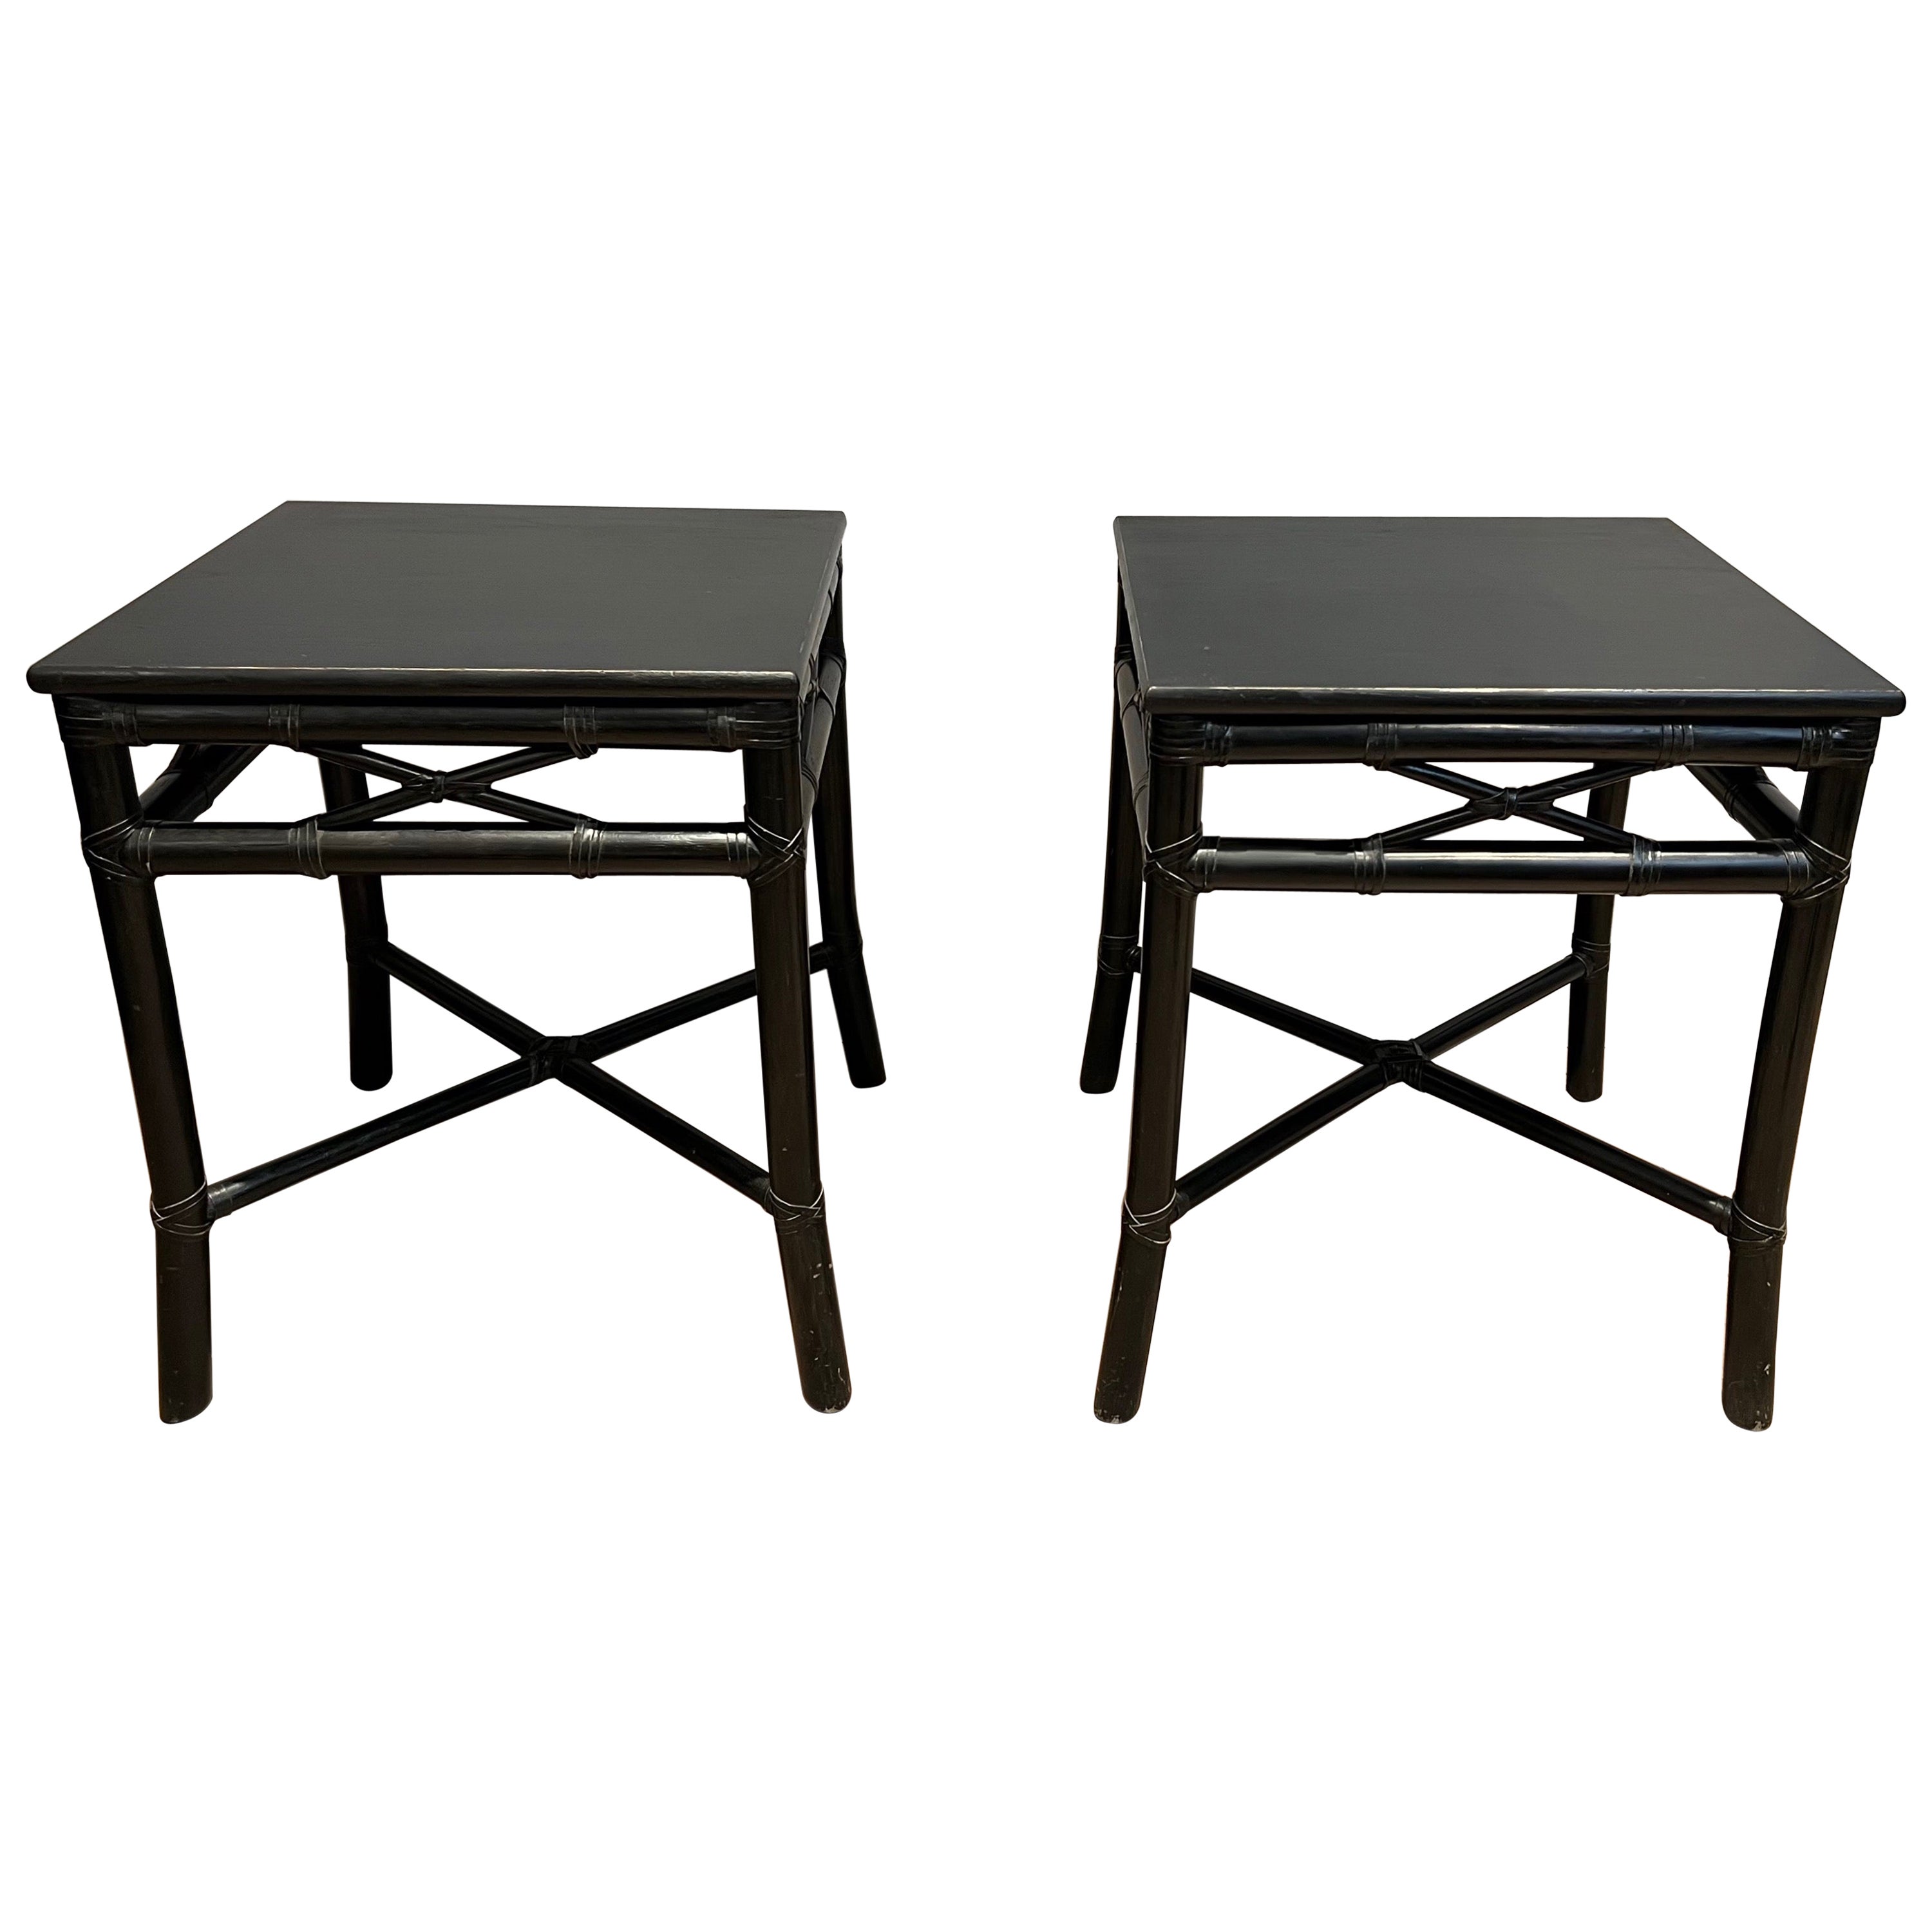 Pair of Black Lacquered Faux-Bamboo Side Tables by Gasparucci